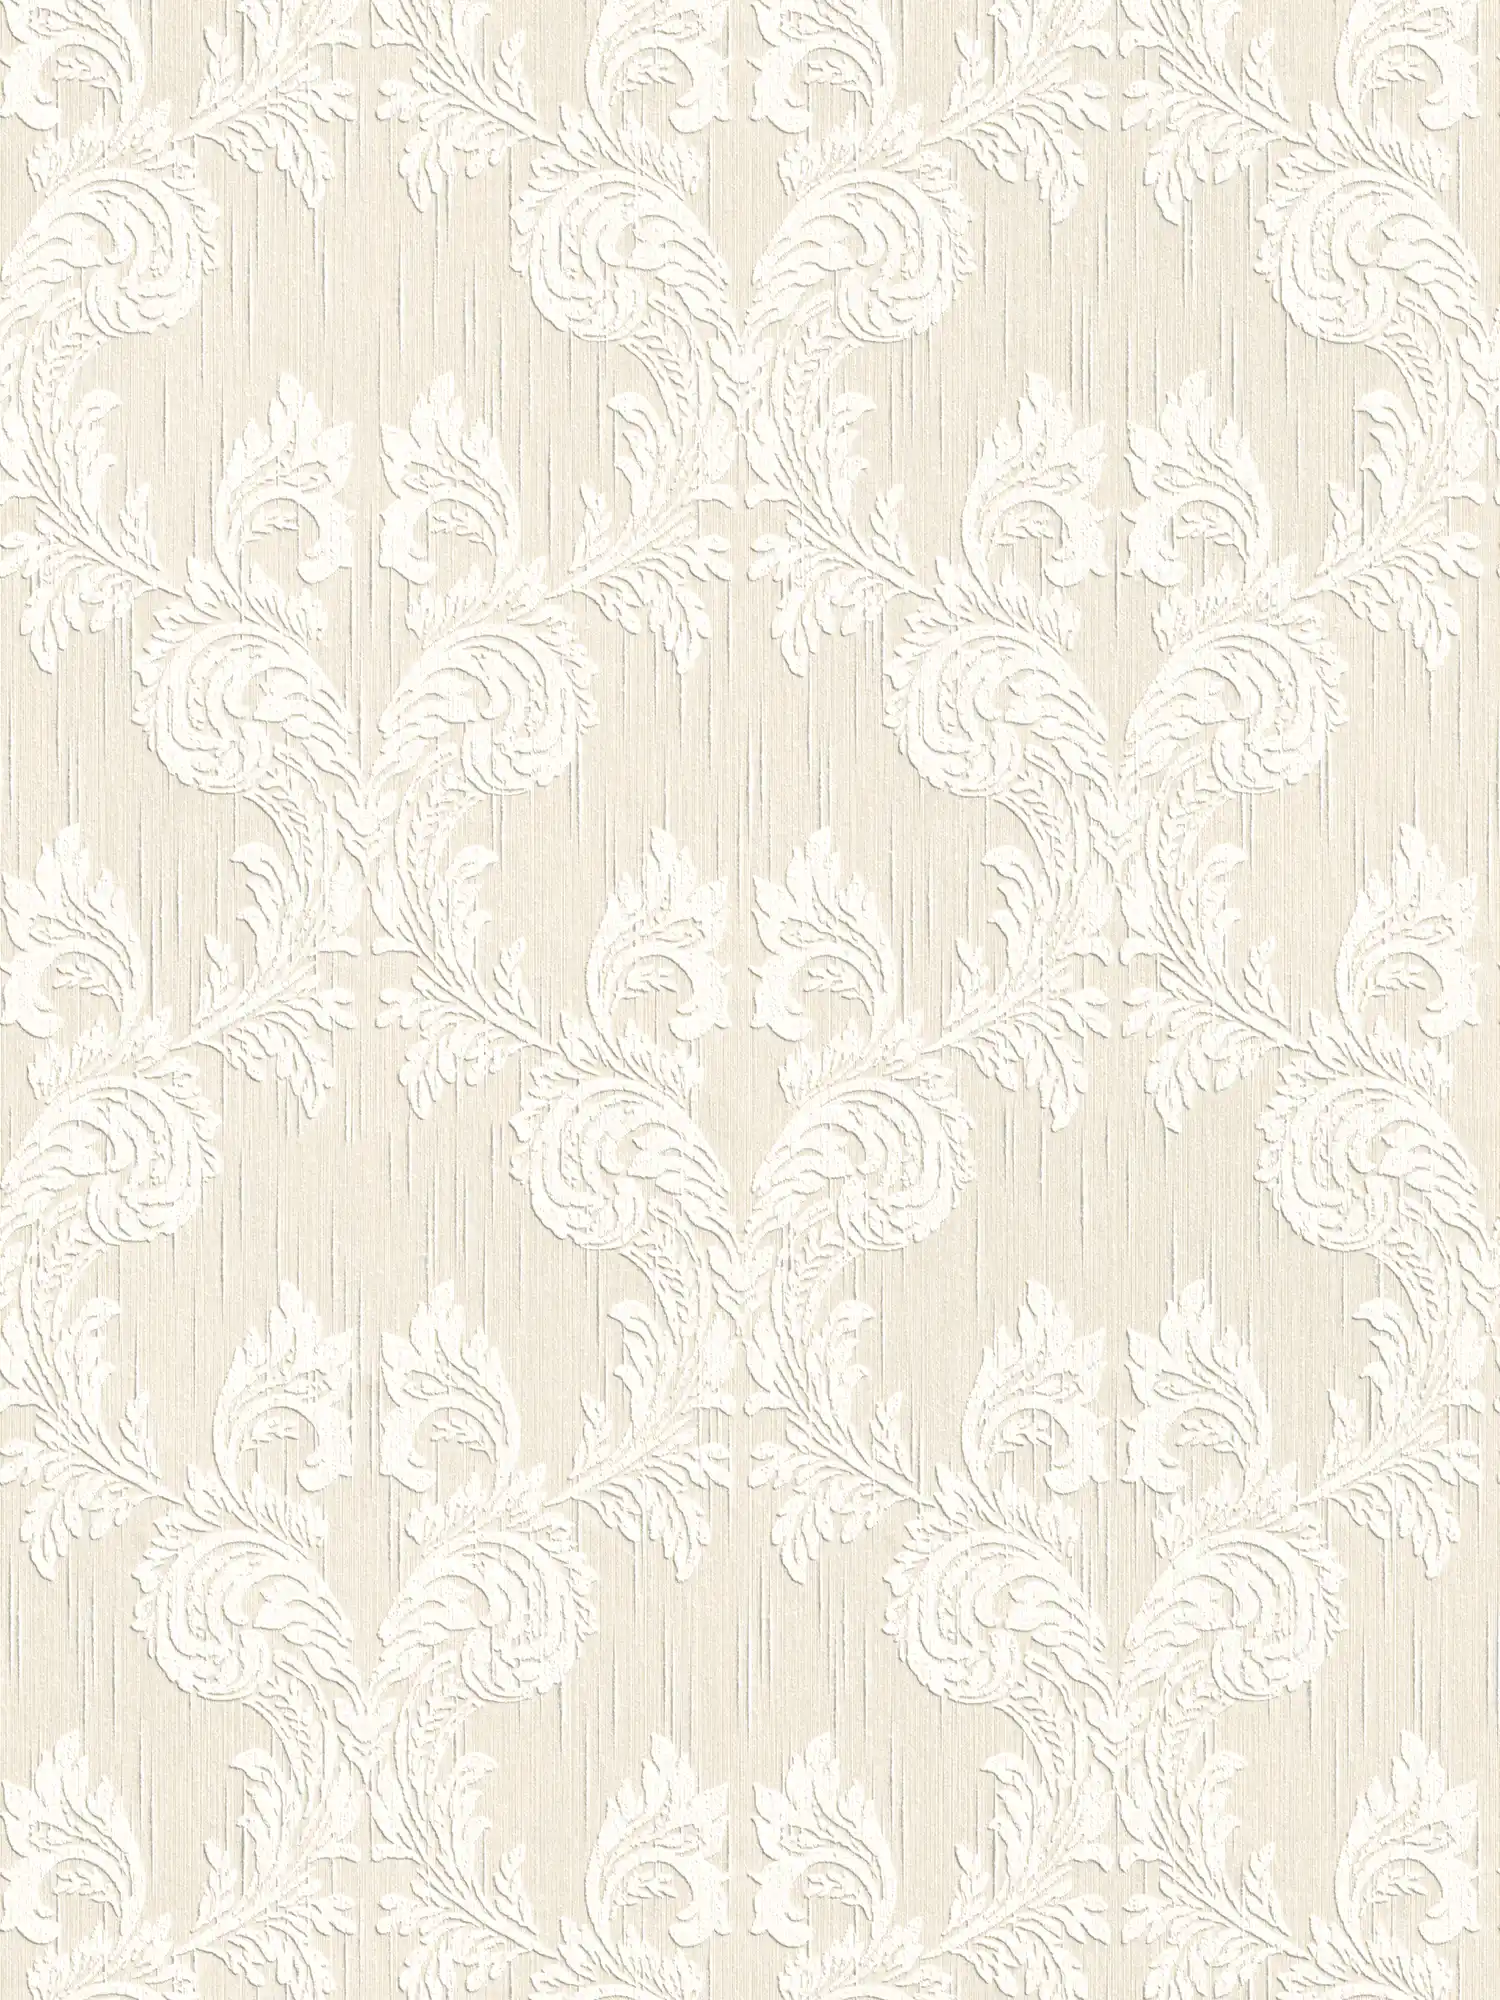 Textured wallpaper with dimensional ornamental vines - cream
